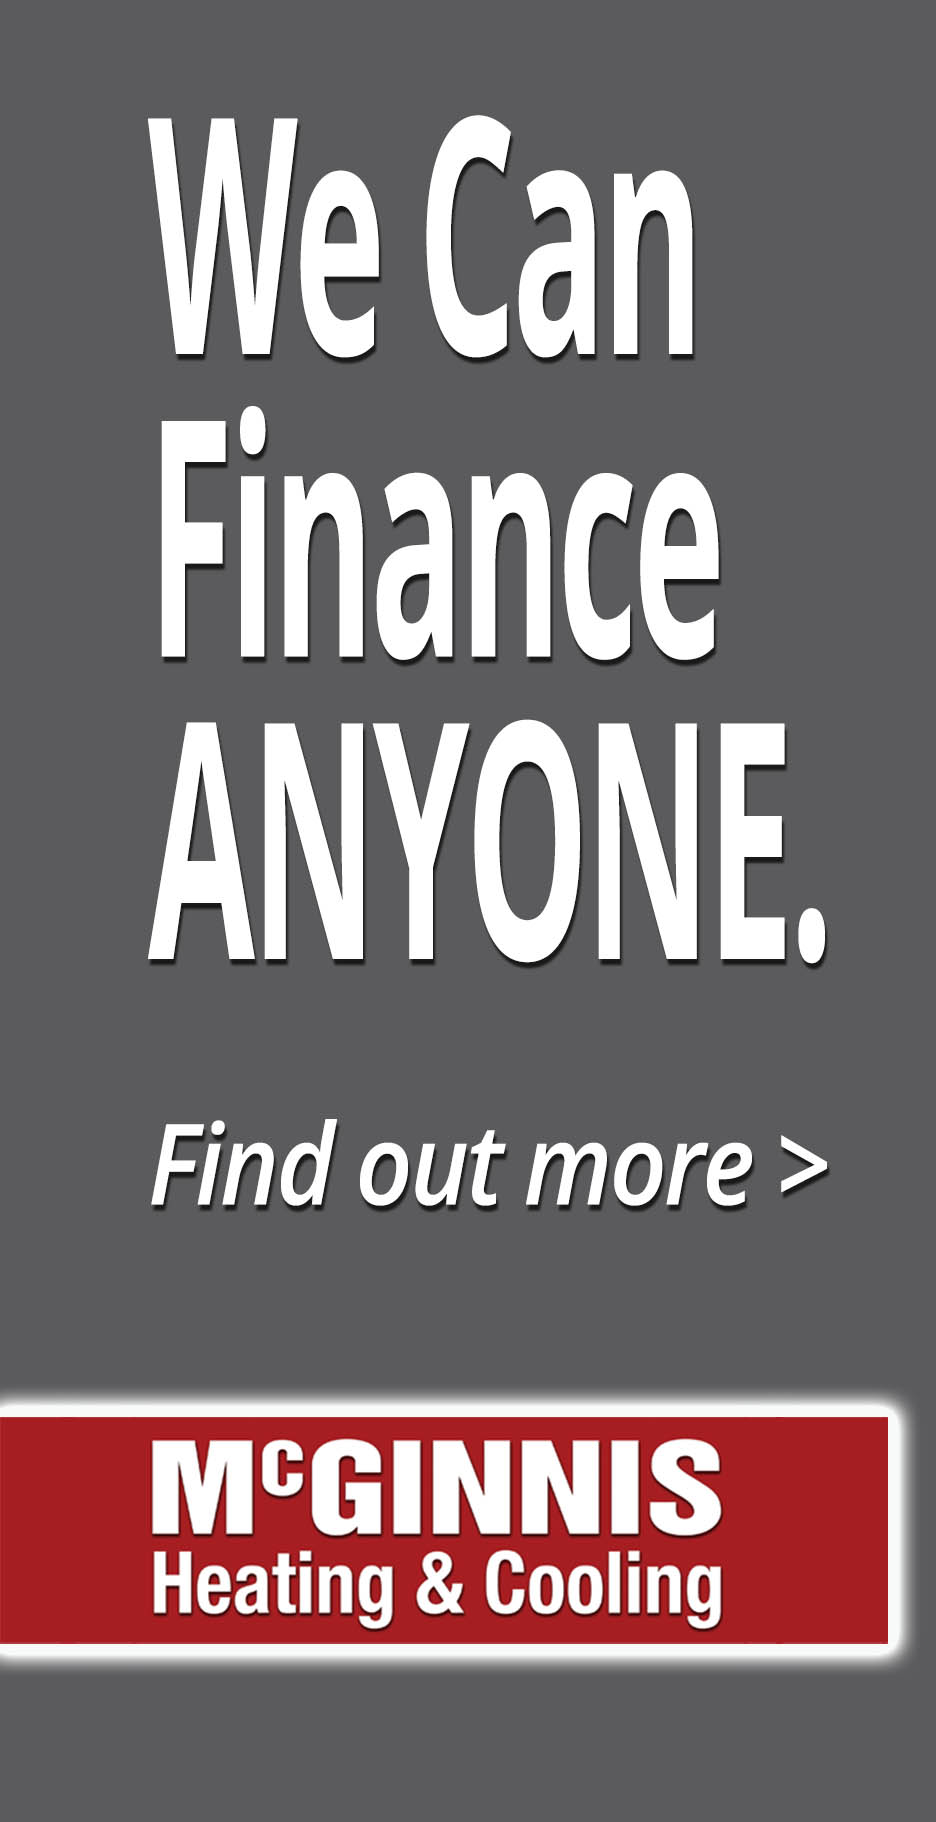 McGinnis Heating and Cooling financing